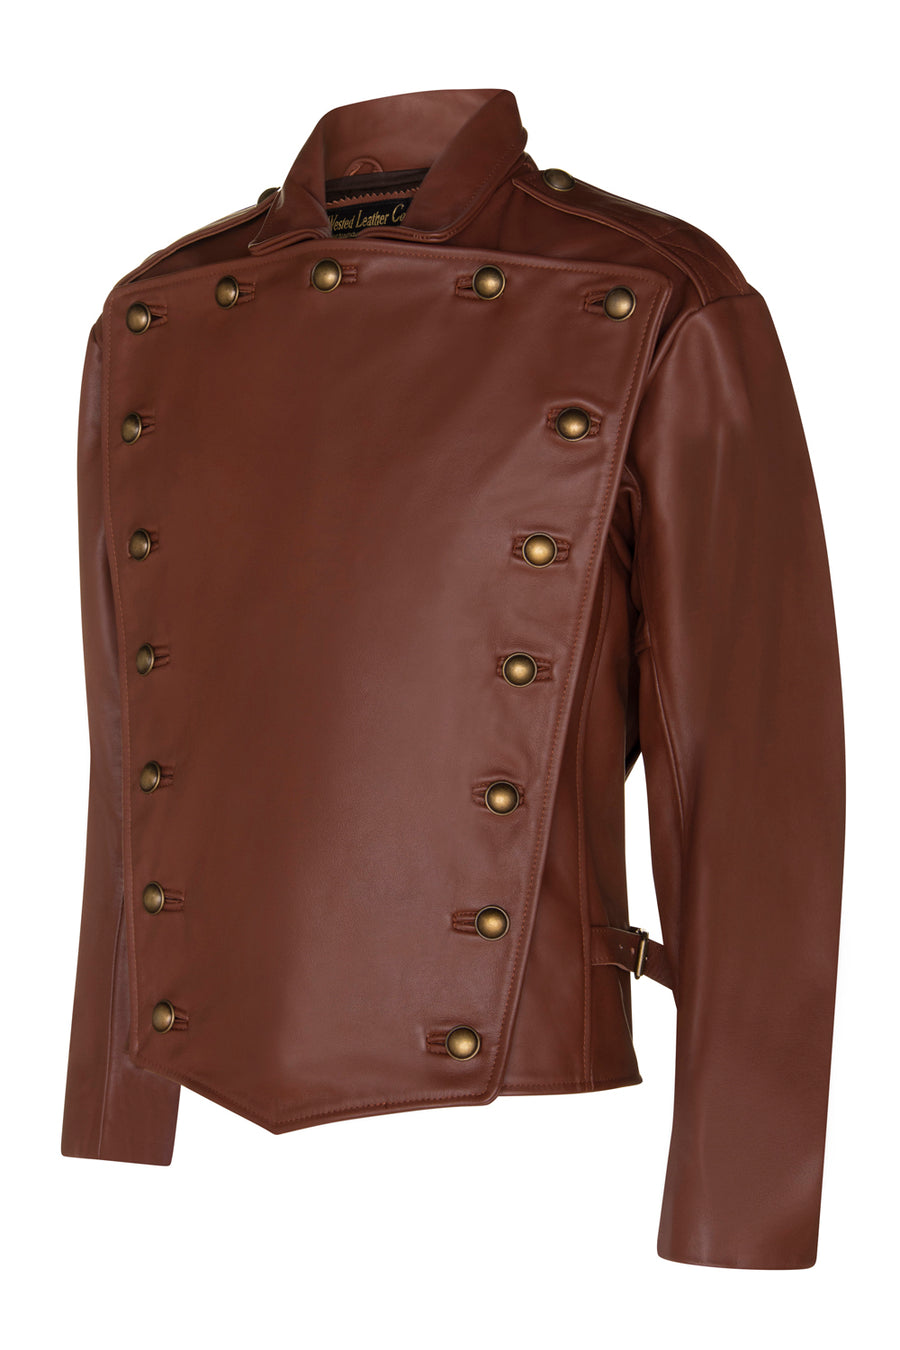 CUSTOM MADE Tan Cowhide Leather Rocketeer Jacket as worn by Cliff Secord